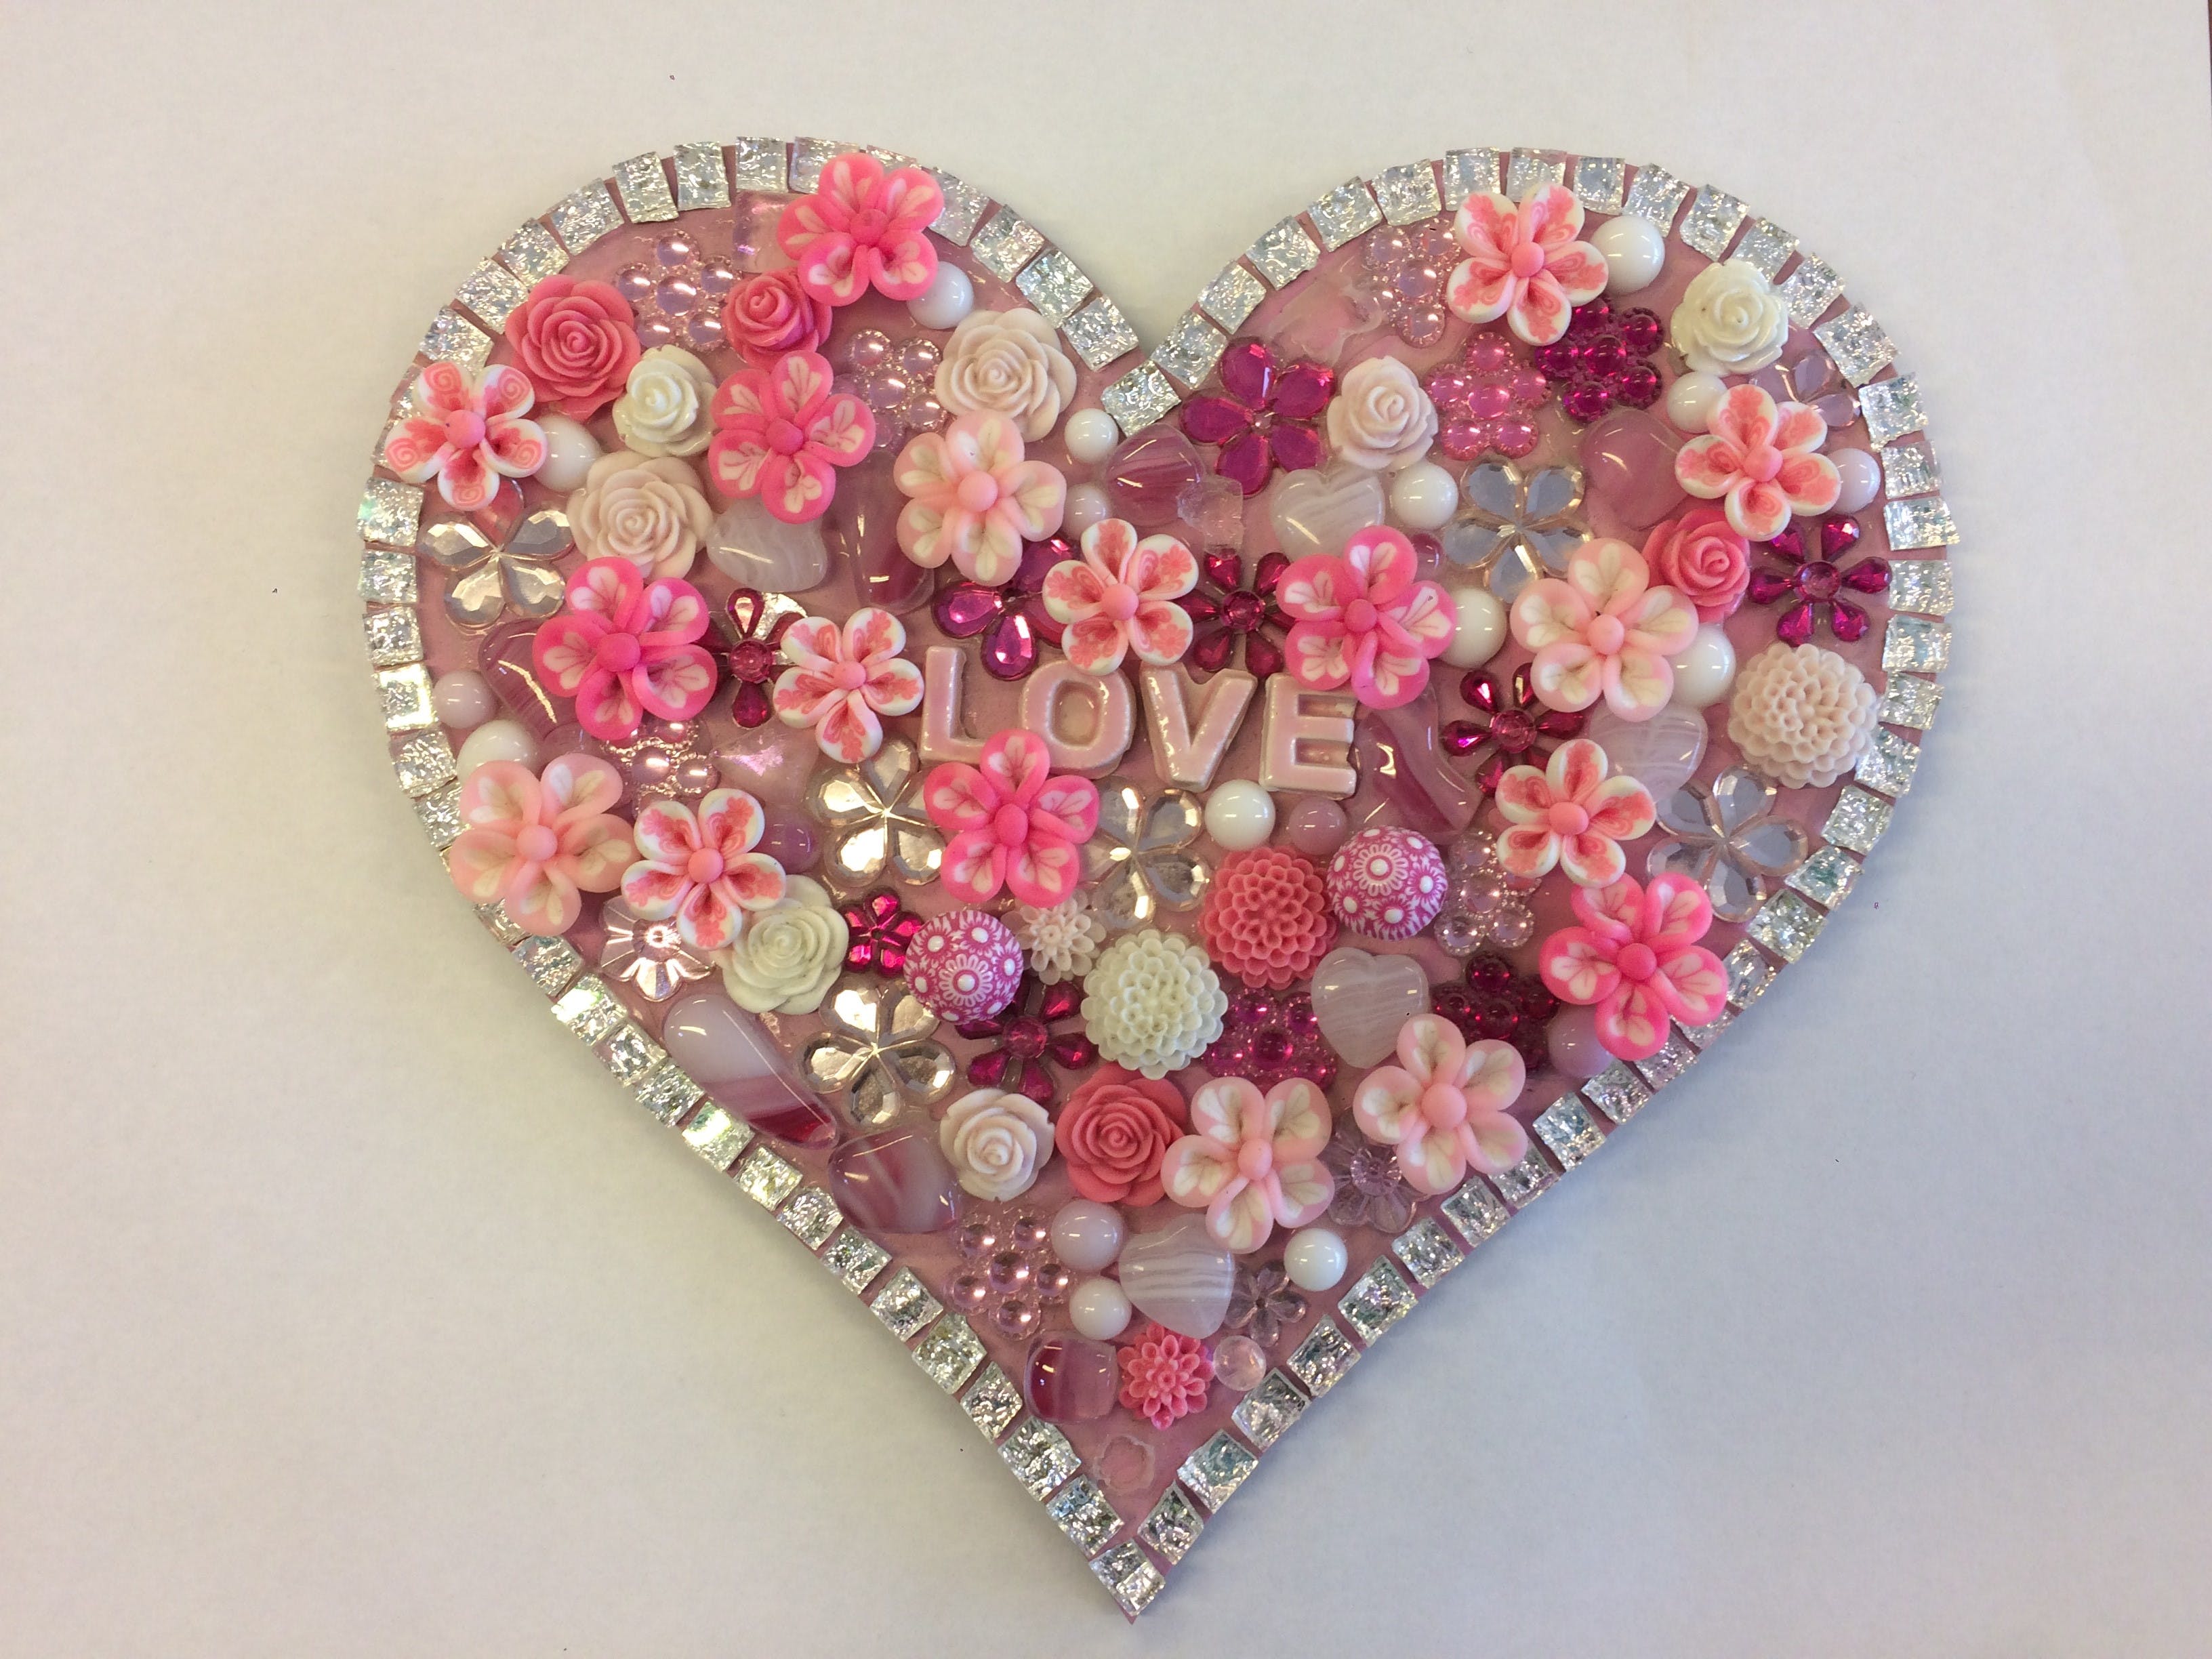 Flowers and Bling Mosaic Class for Kids - Melbourne Tourism